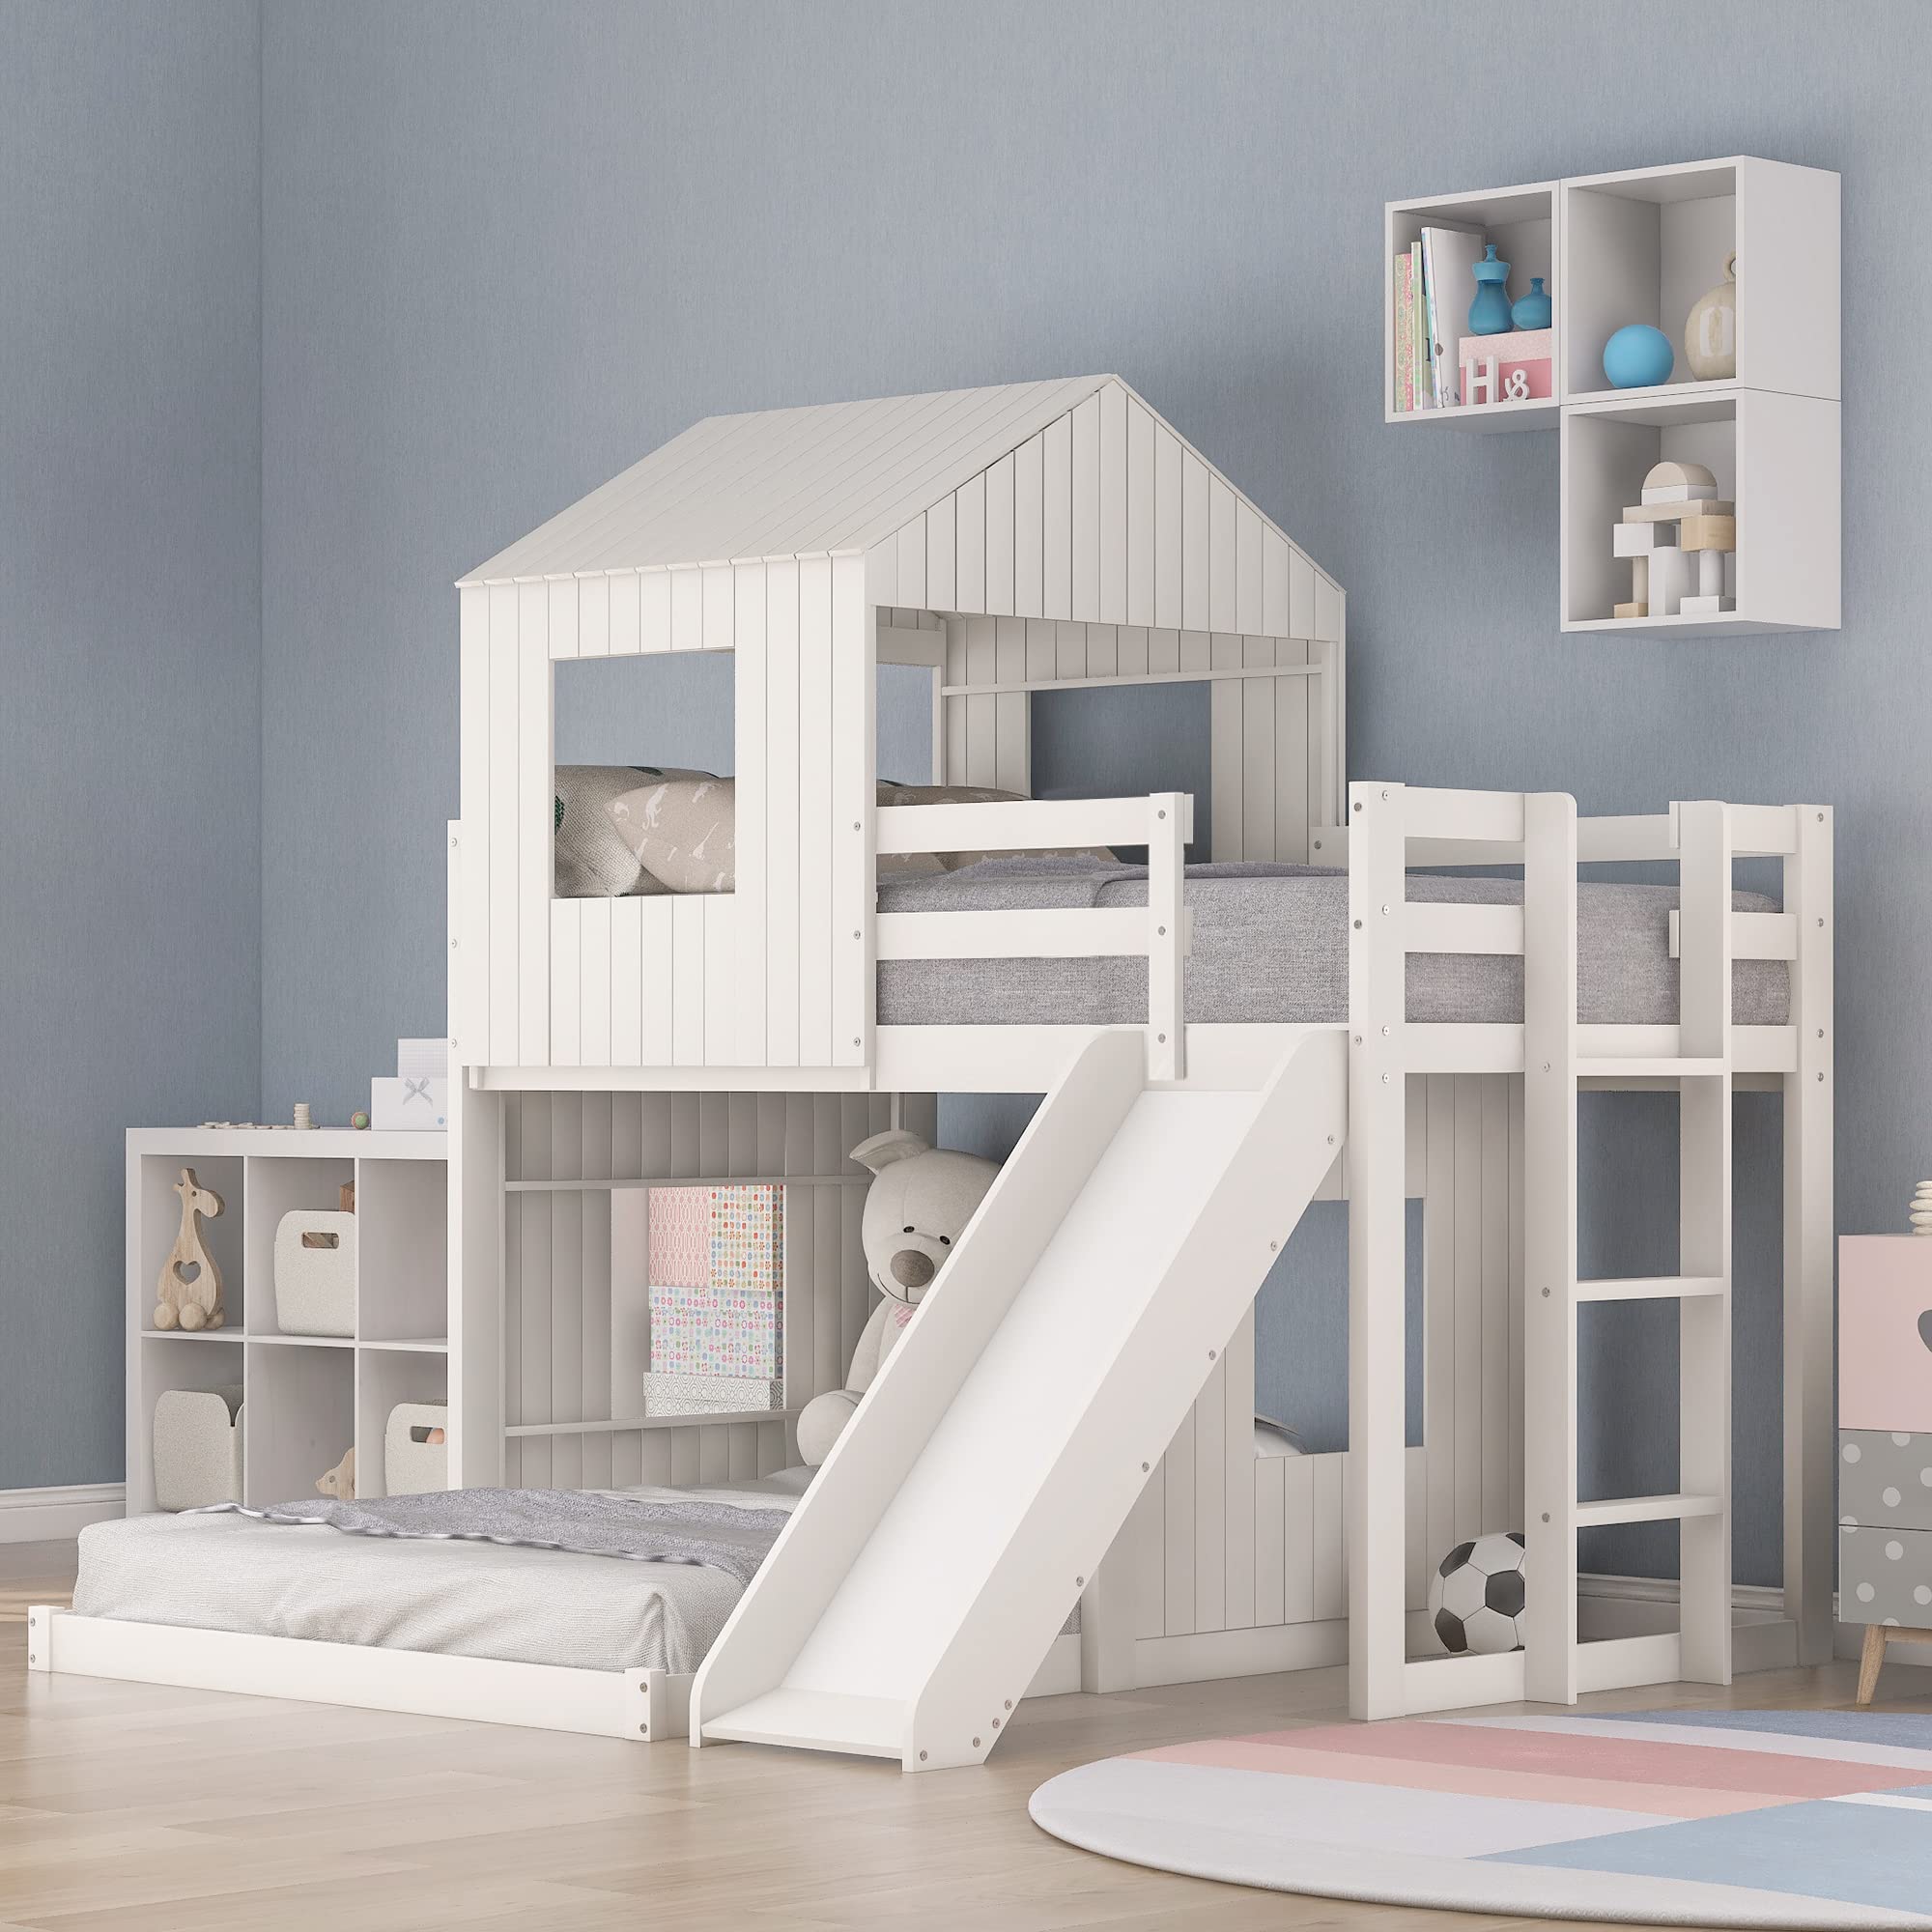 Harper & Bright Designs Wood House/ Bunk Bed with Slide, Roof and Guard Rail for Kids, Toddlers, No Box Spring Needed